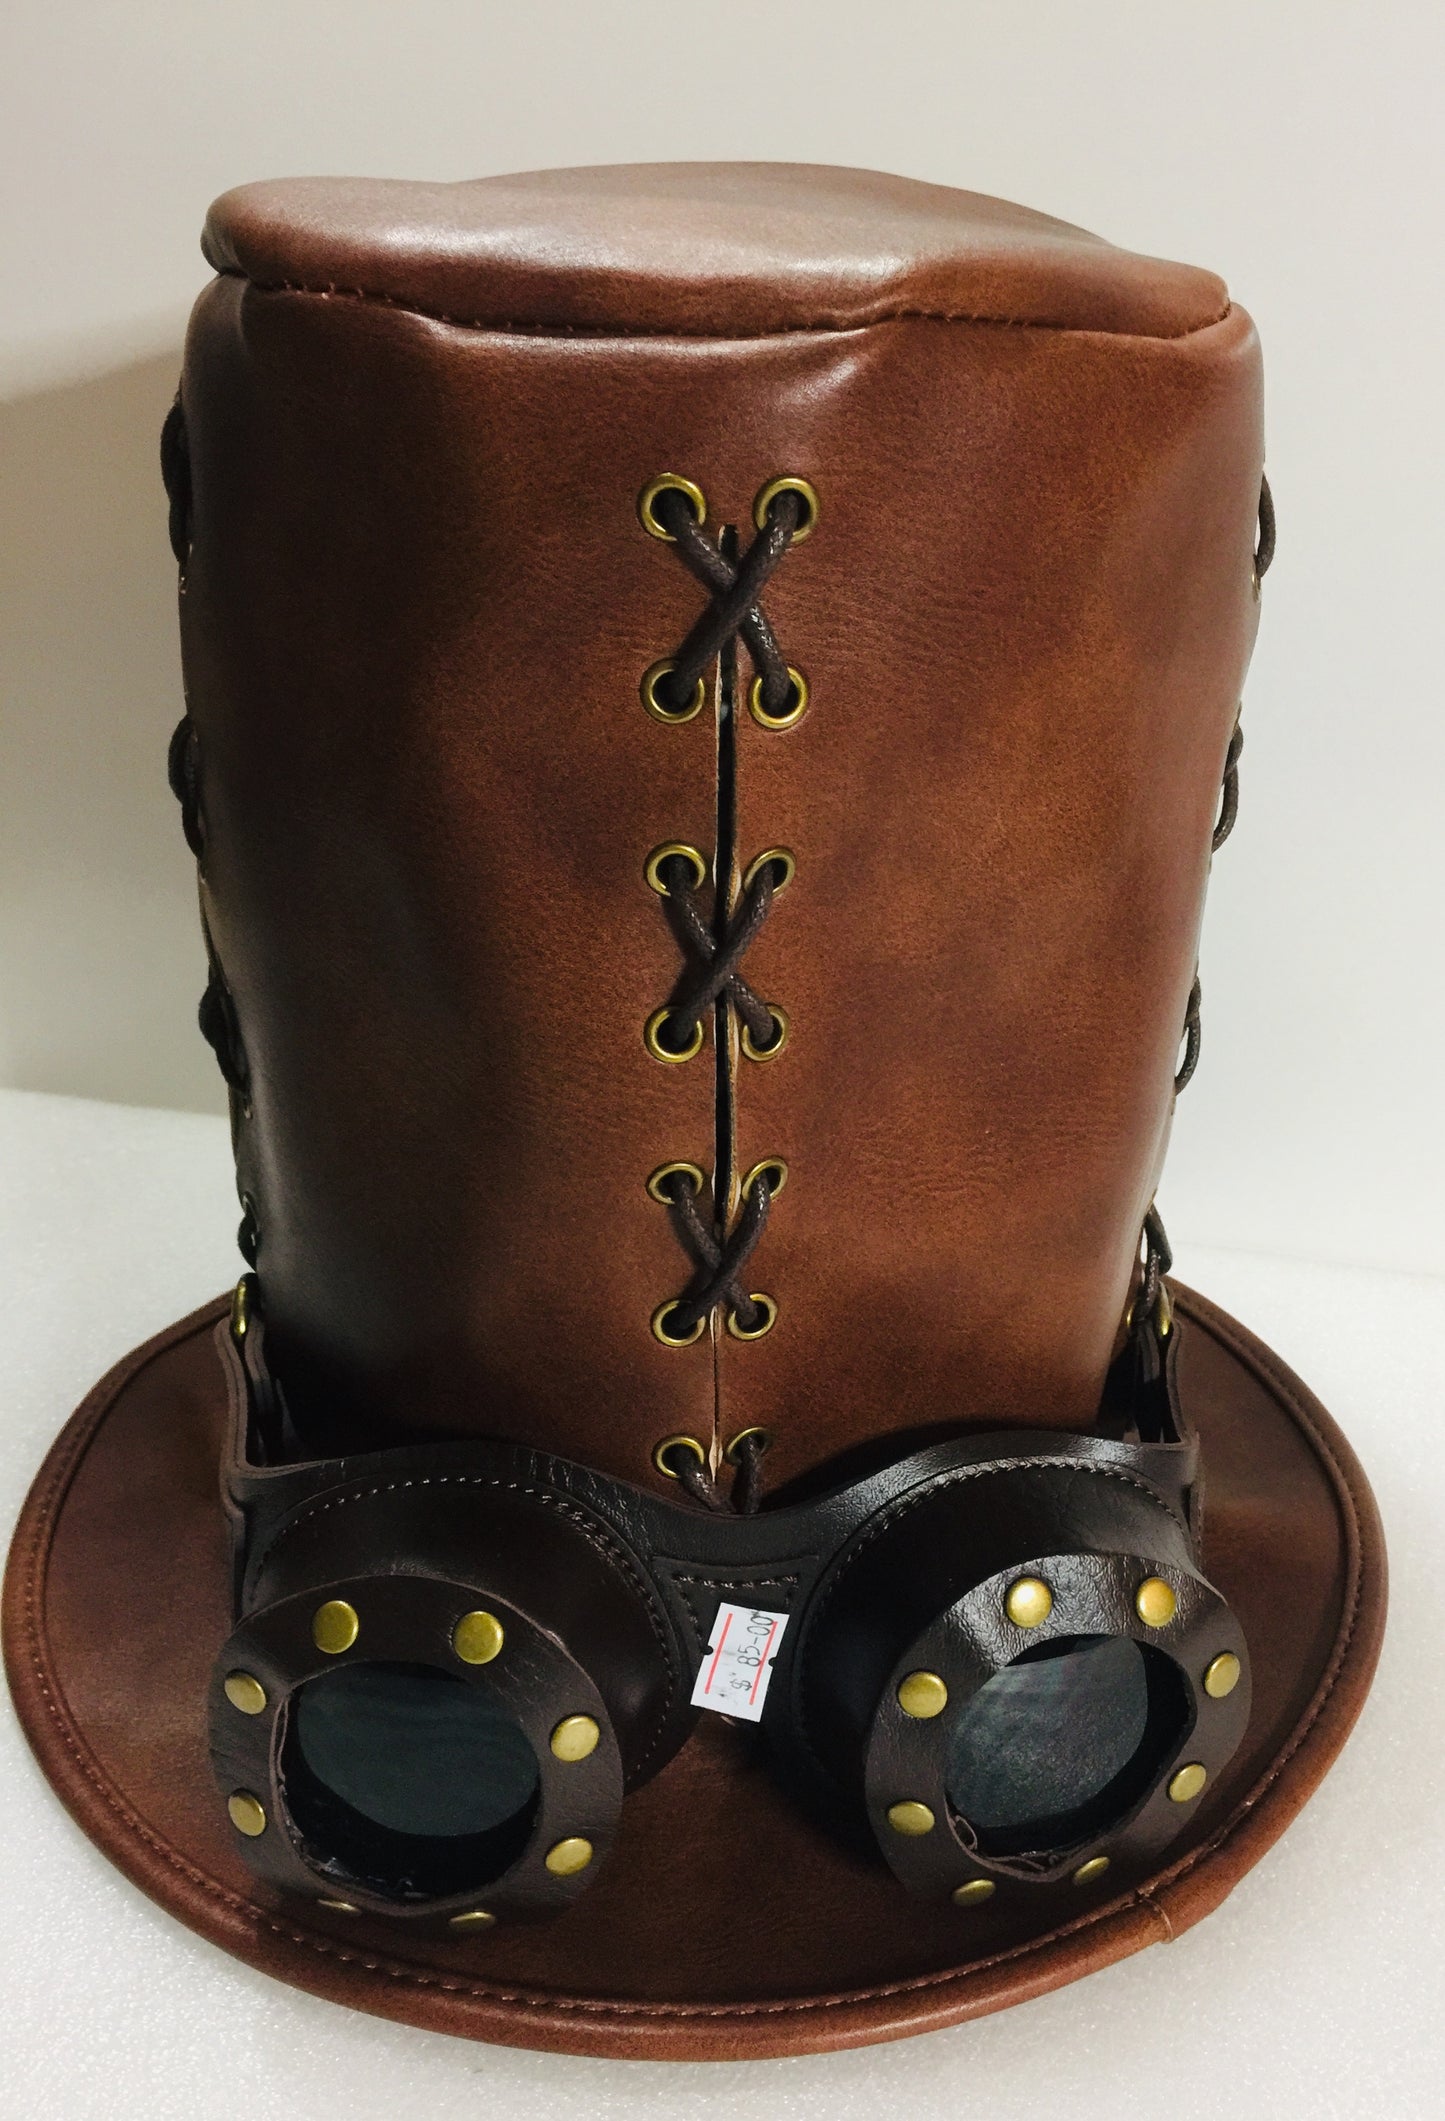 Steampunk Top Hat Tall brown with goggles 28 cm tall